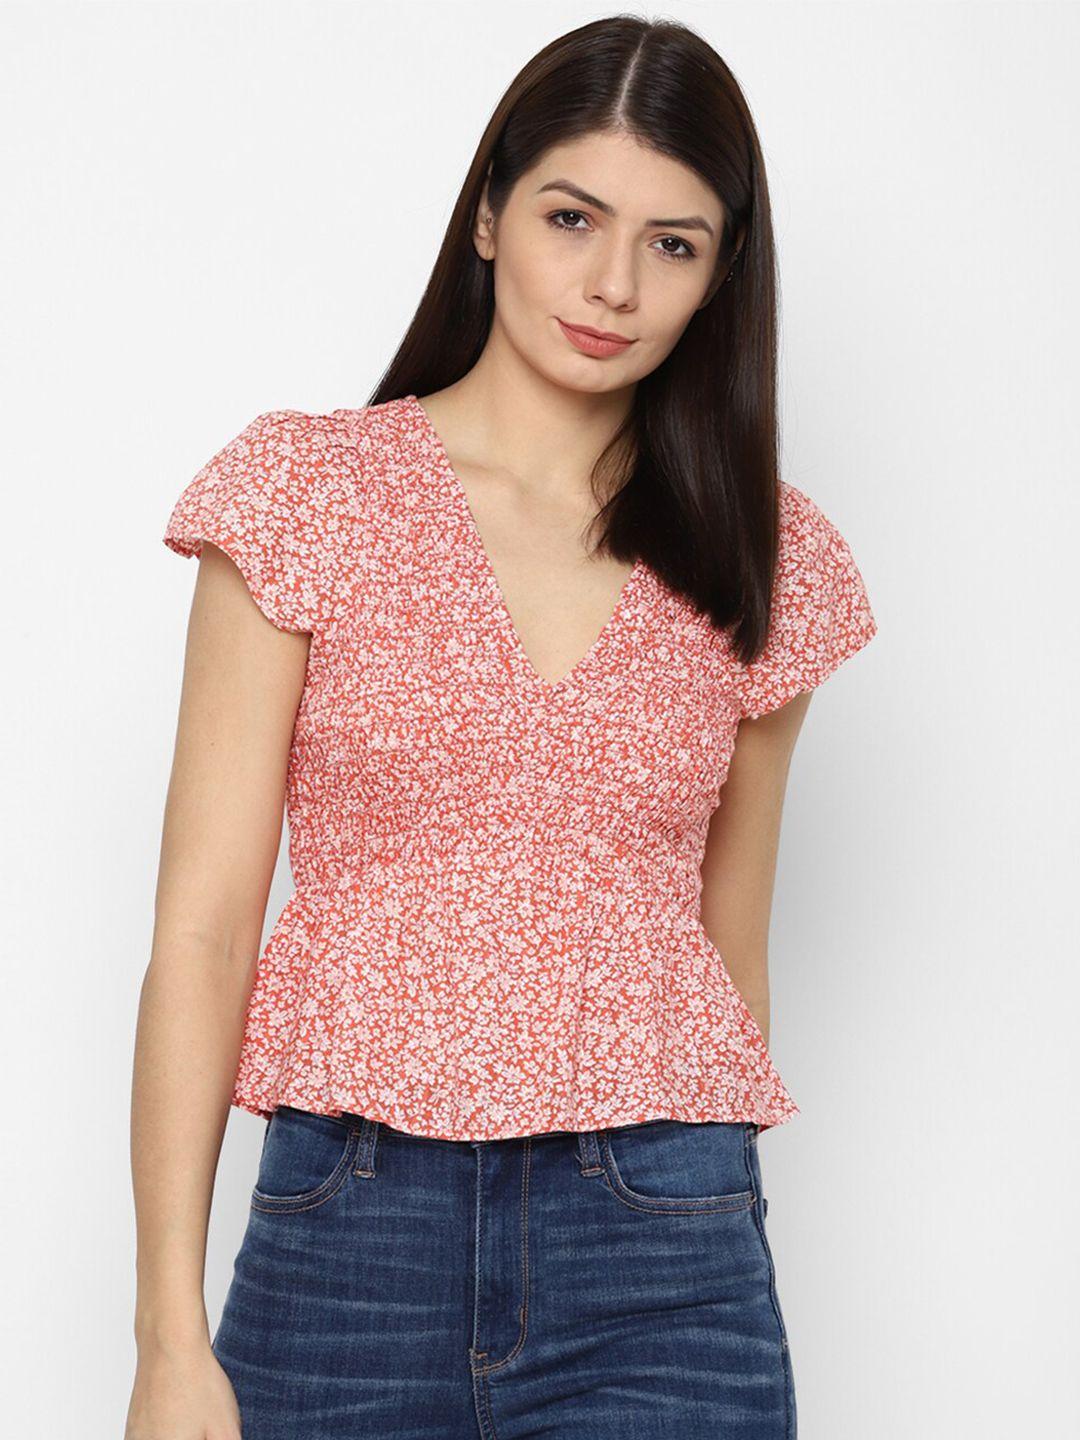 american eagle outfitters orange floral print peplum top